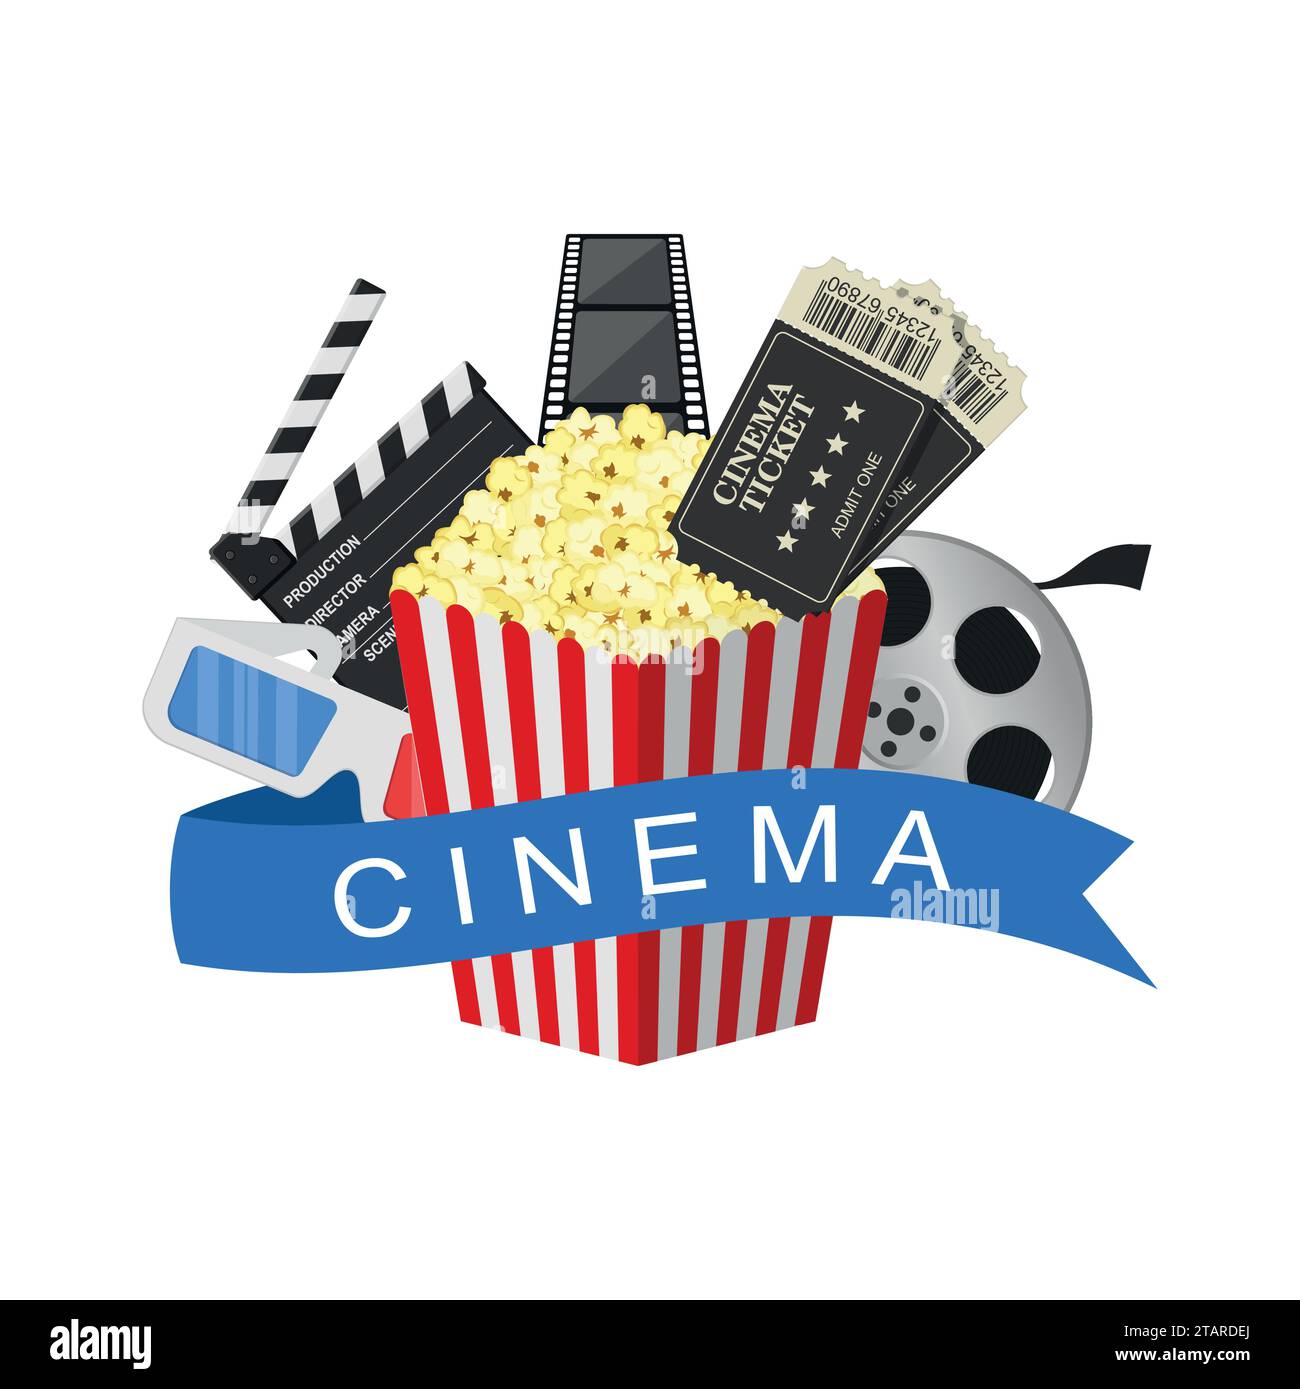 Cinema art movie watching. Cinema industry symbols icons isolated on white background. Vector Illustration Stock Vector